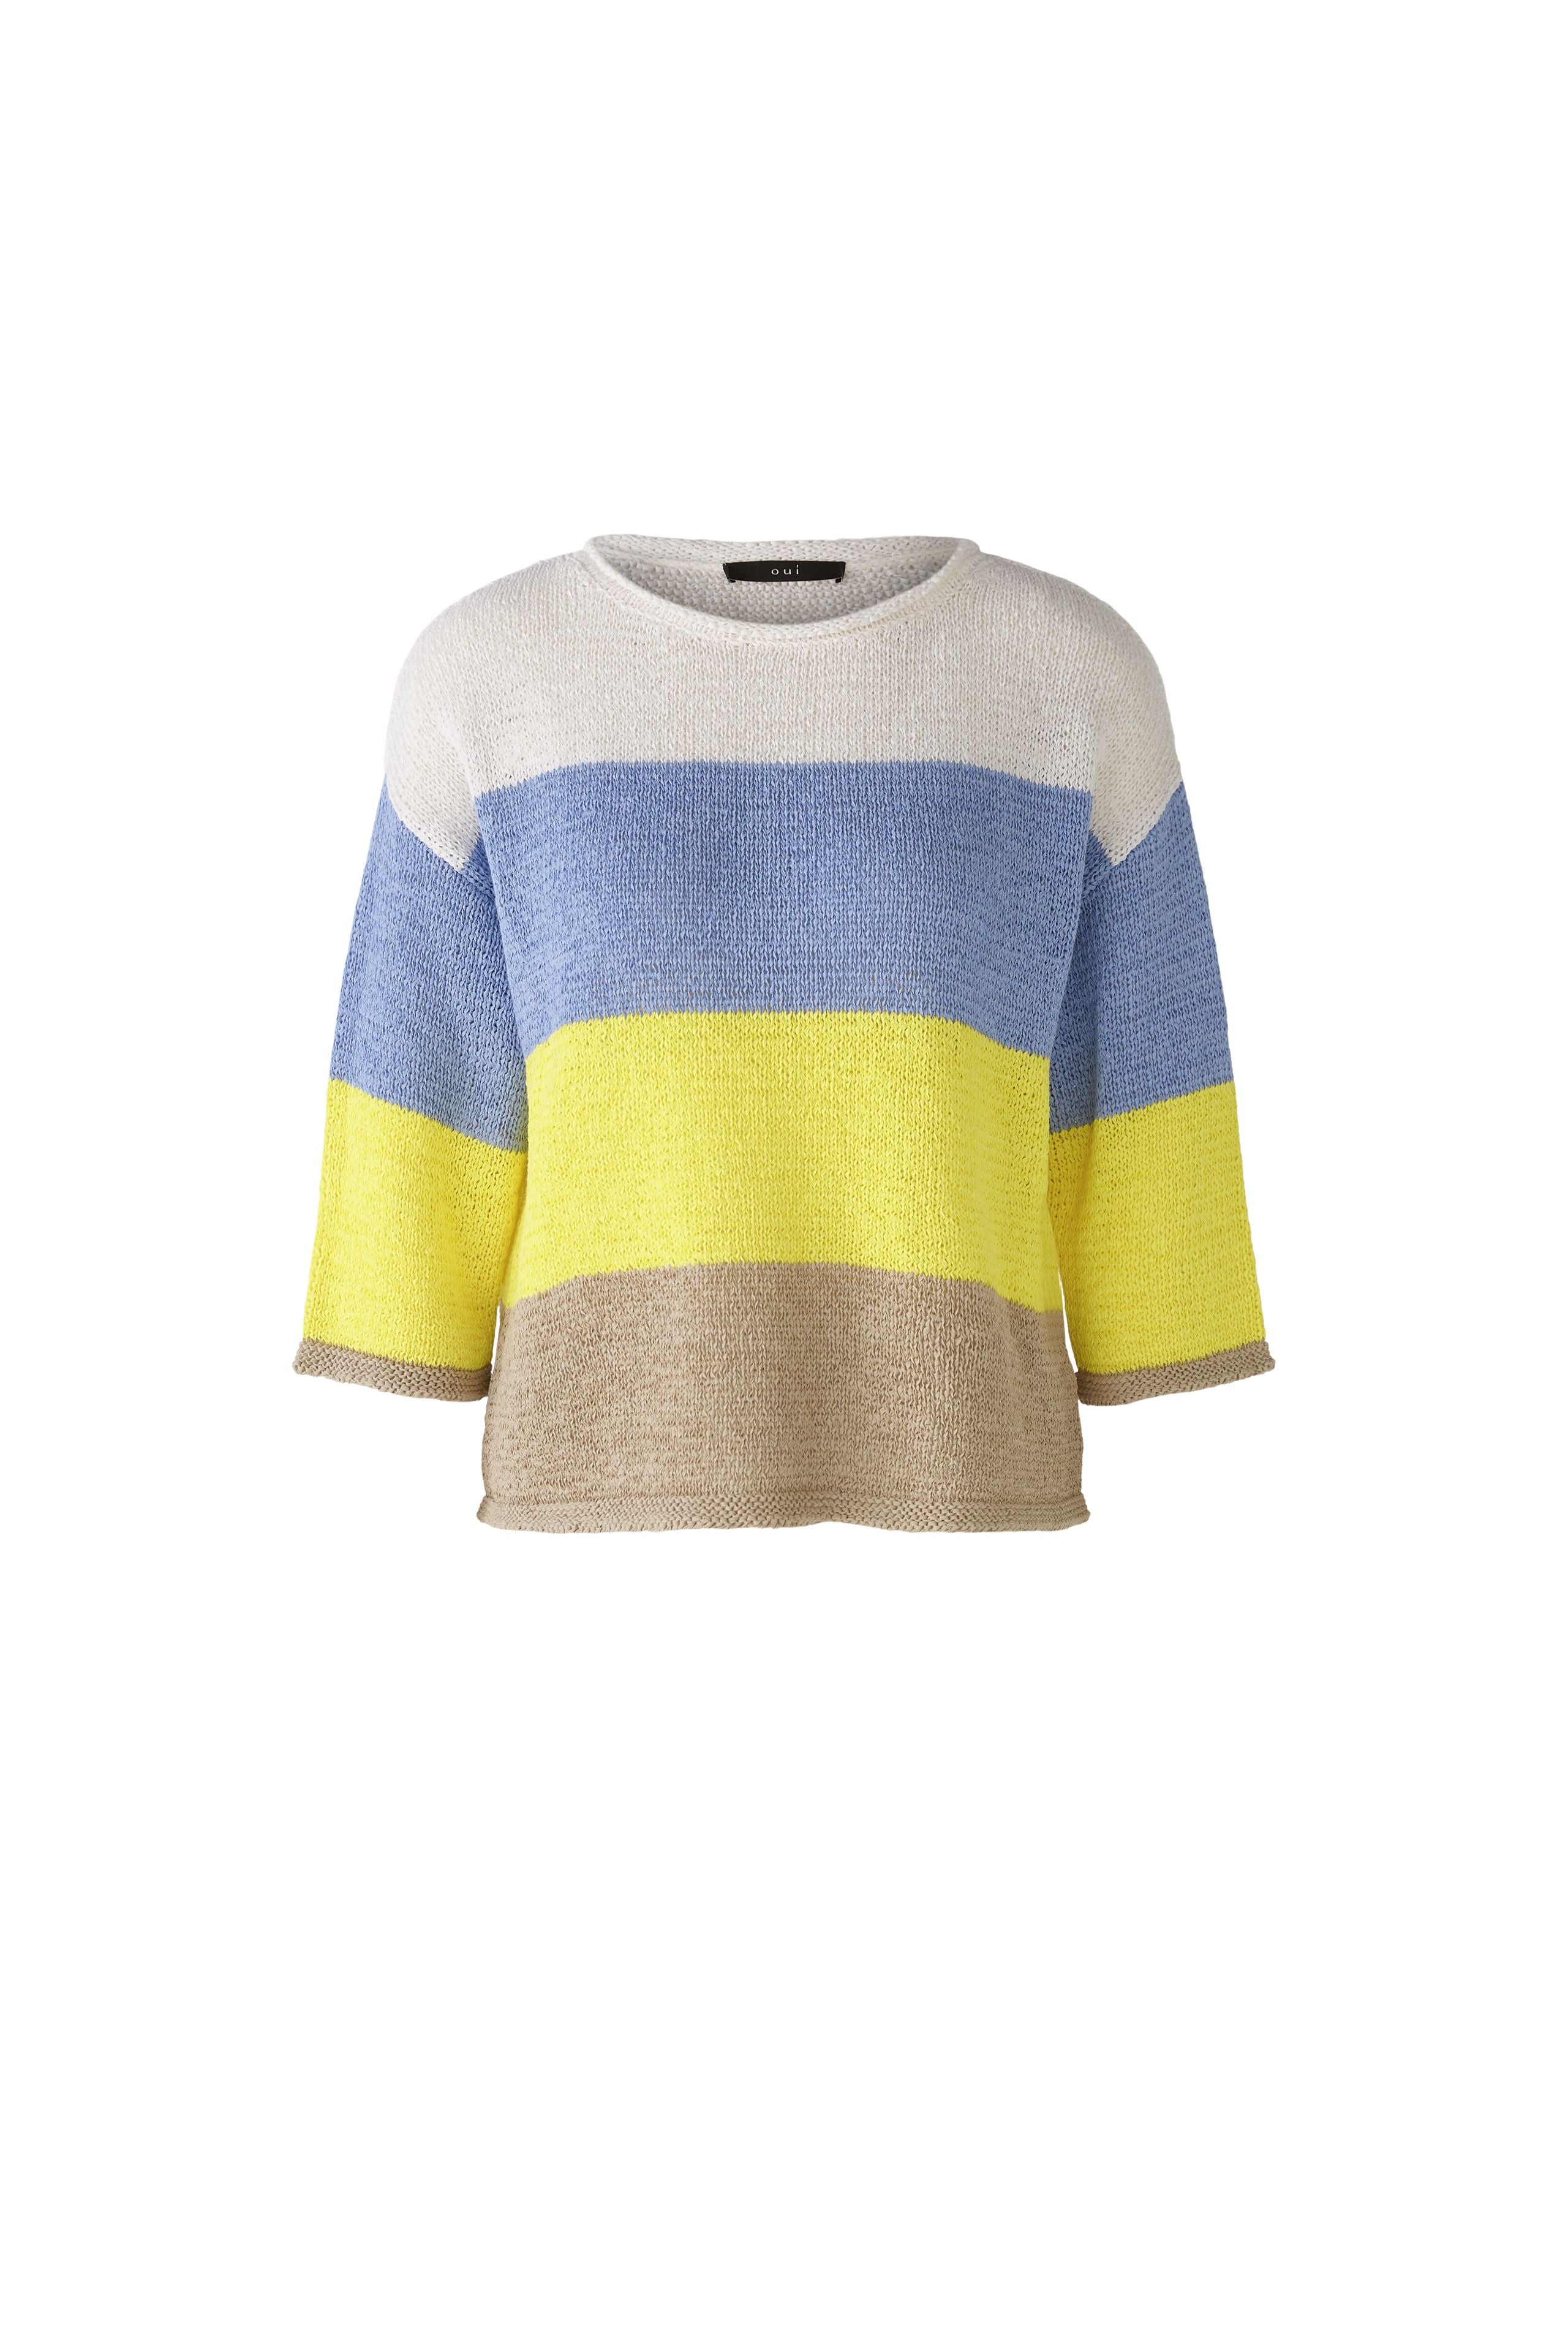 Stripped Cotton Jumper in Light Blue/Yellow